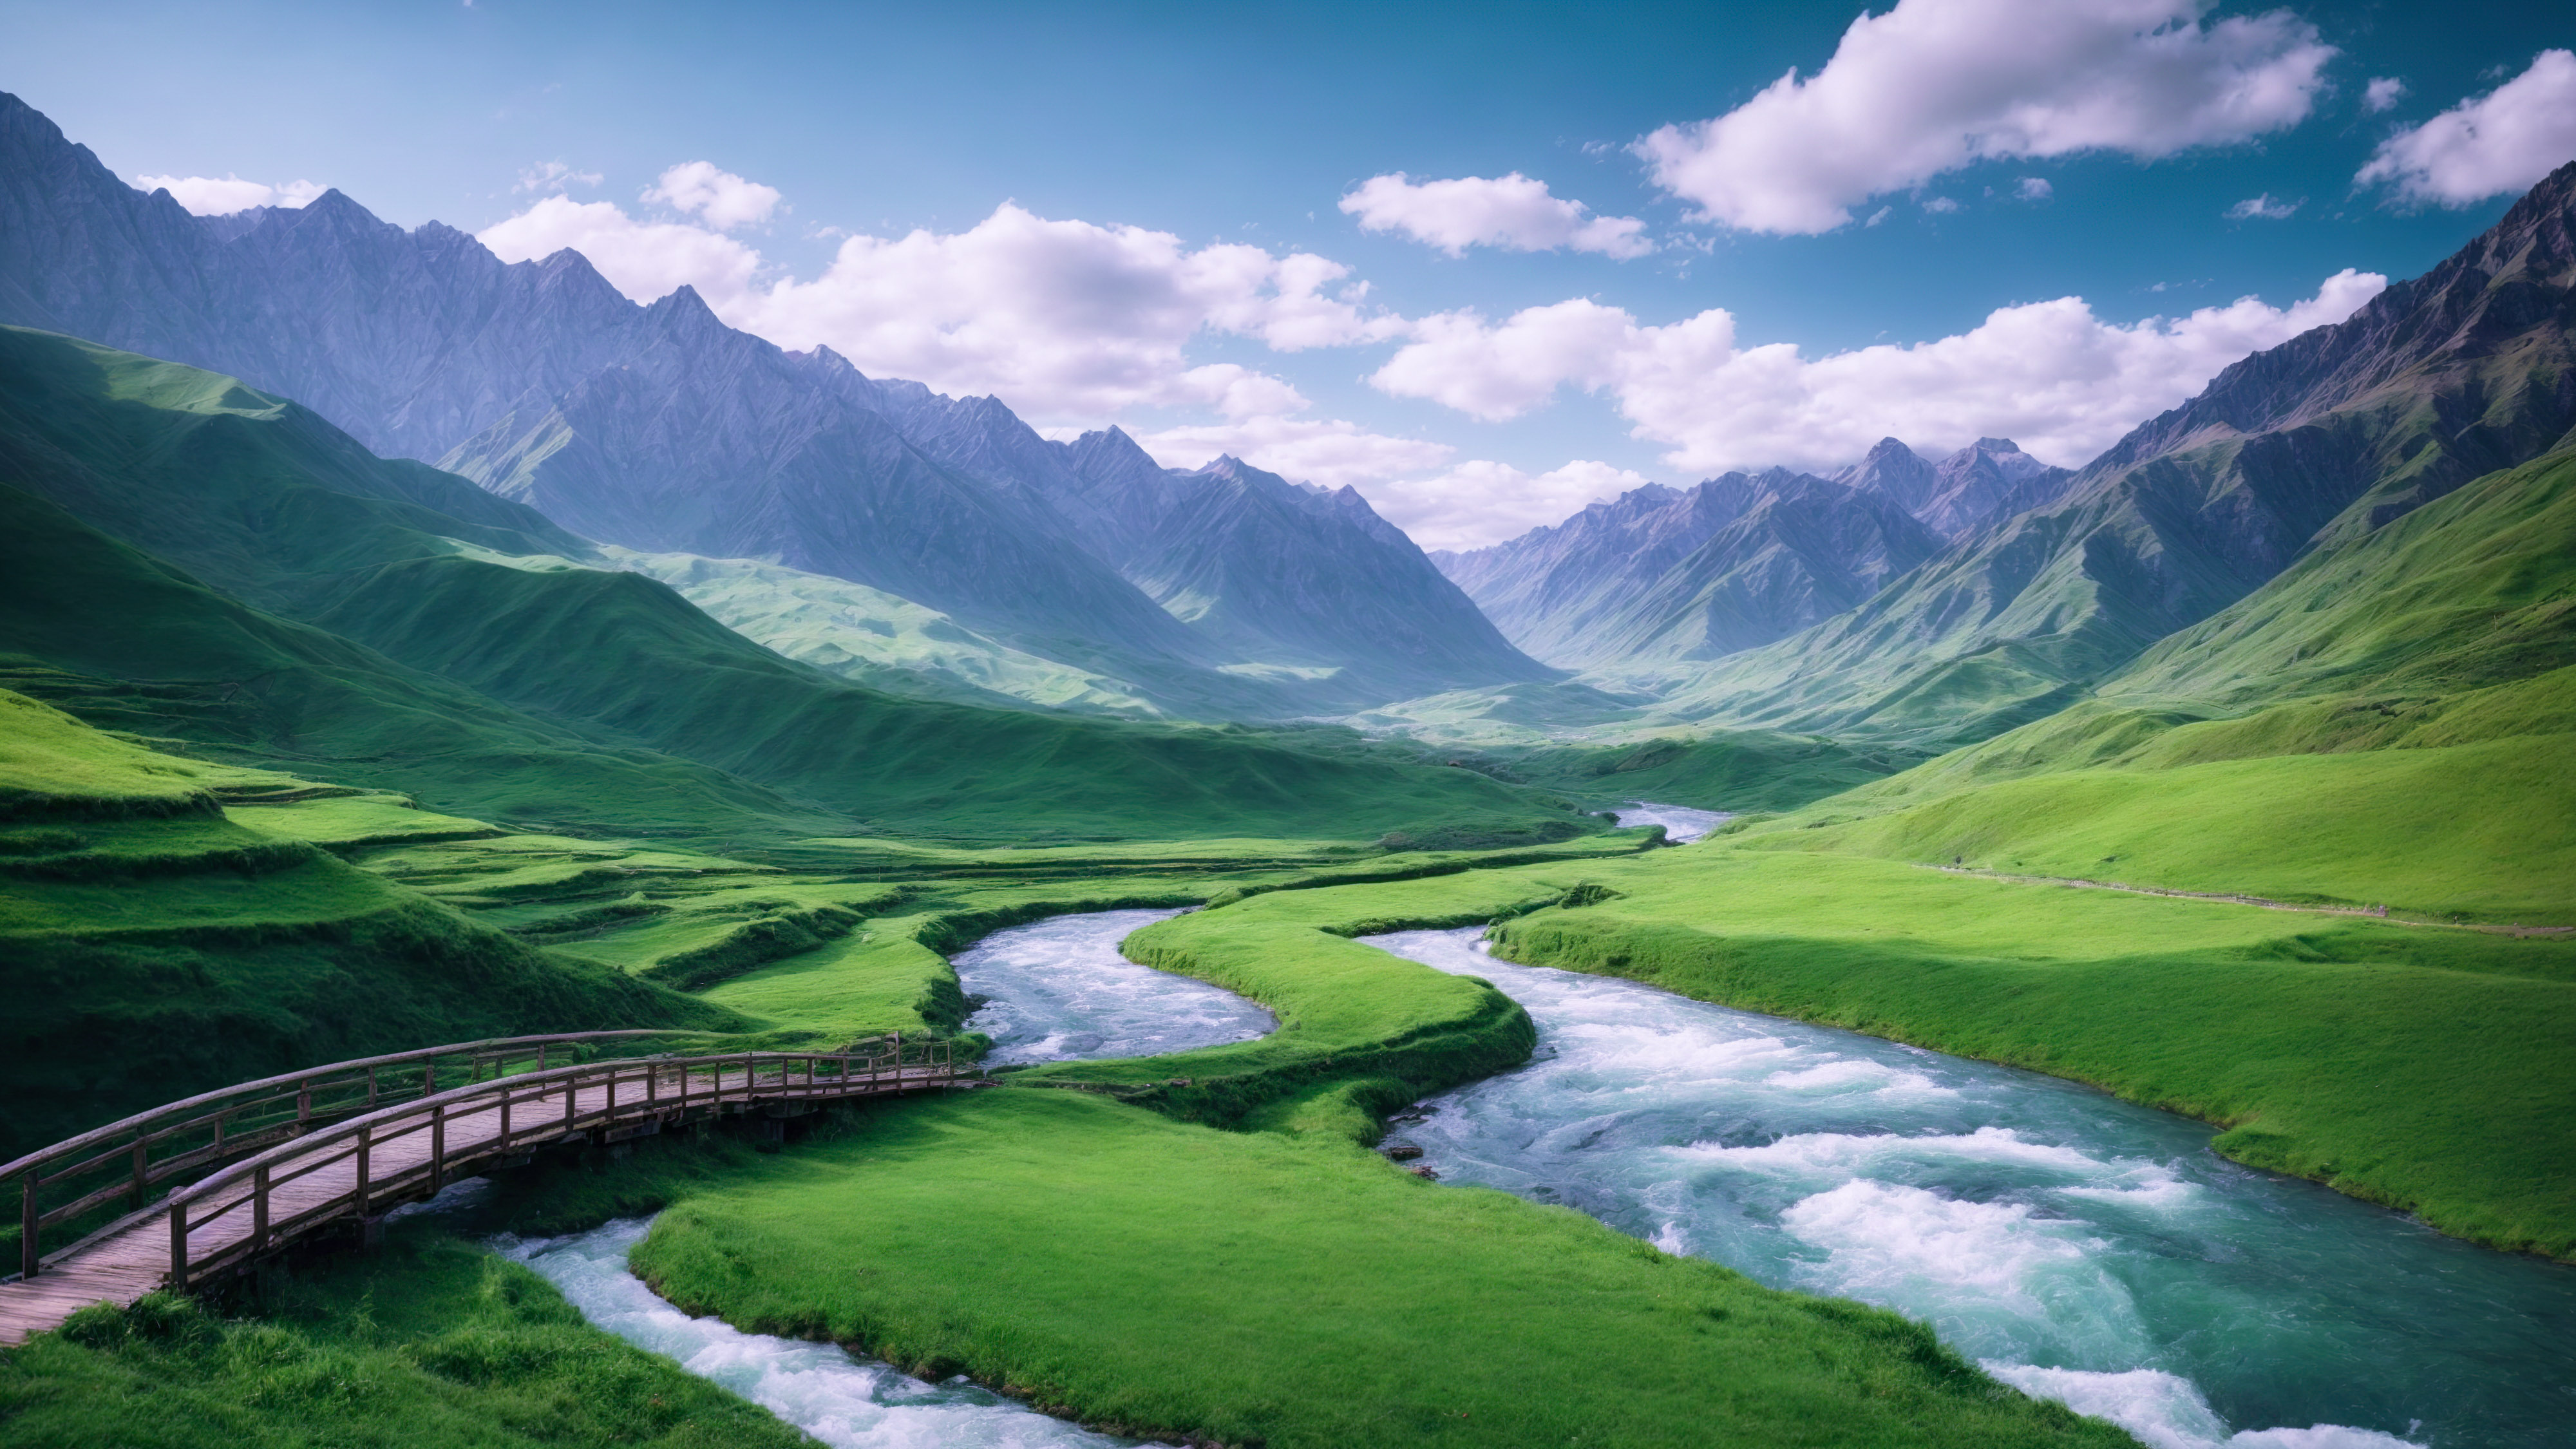 Immerse yourself in the serenity of a green valley surrounded by majestic mountains, with a winding river and a wooden bridge, through our landscape wallpaper.